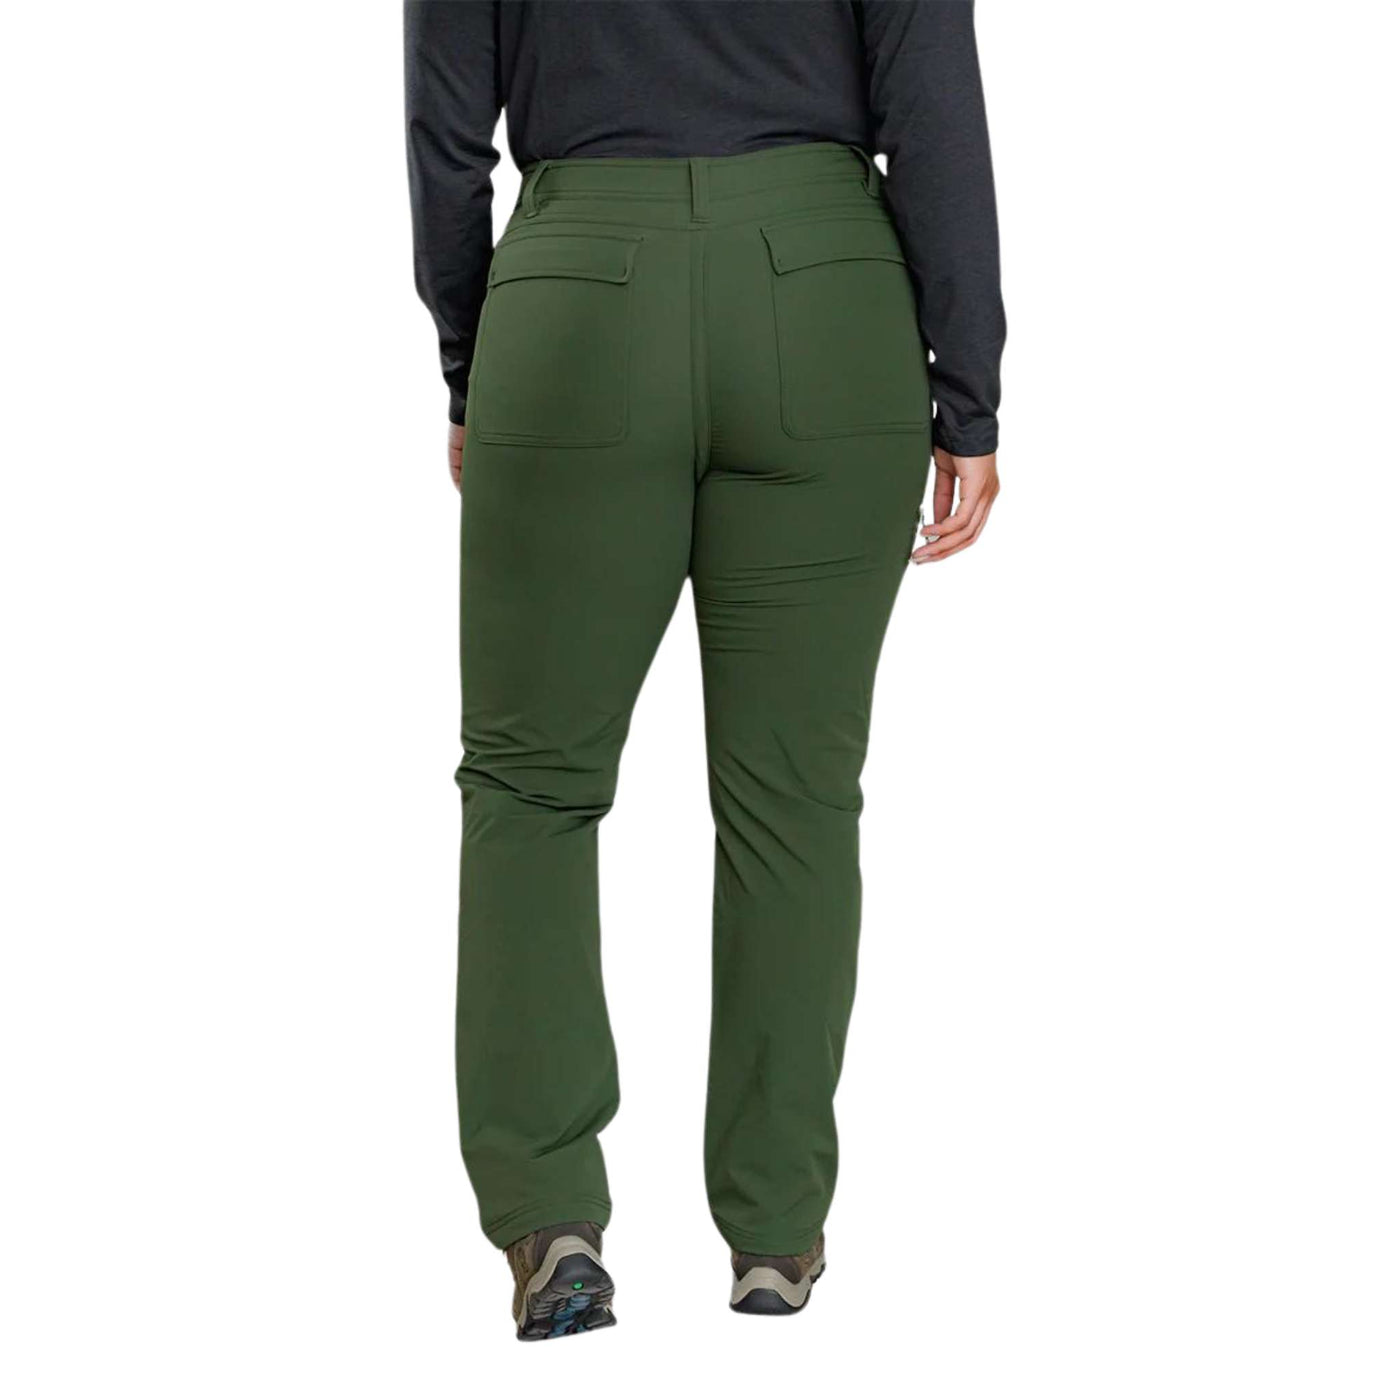 Gnara Go There Pant | Womens Hiking Pants | Further Faster Christchurch NZ | #pine